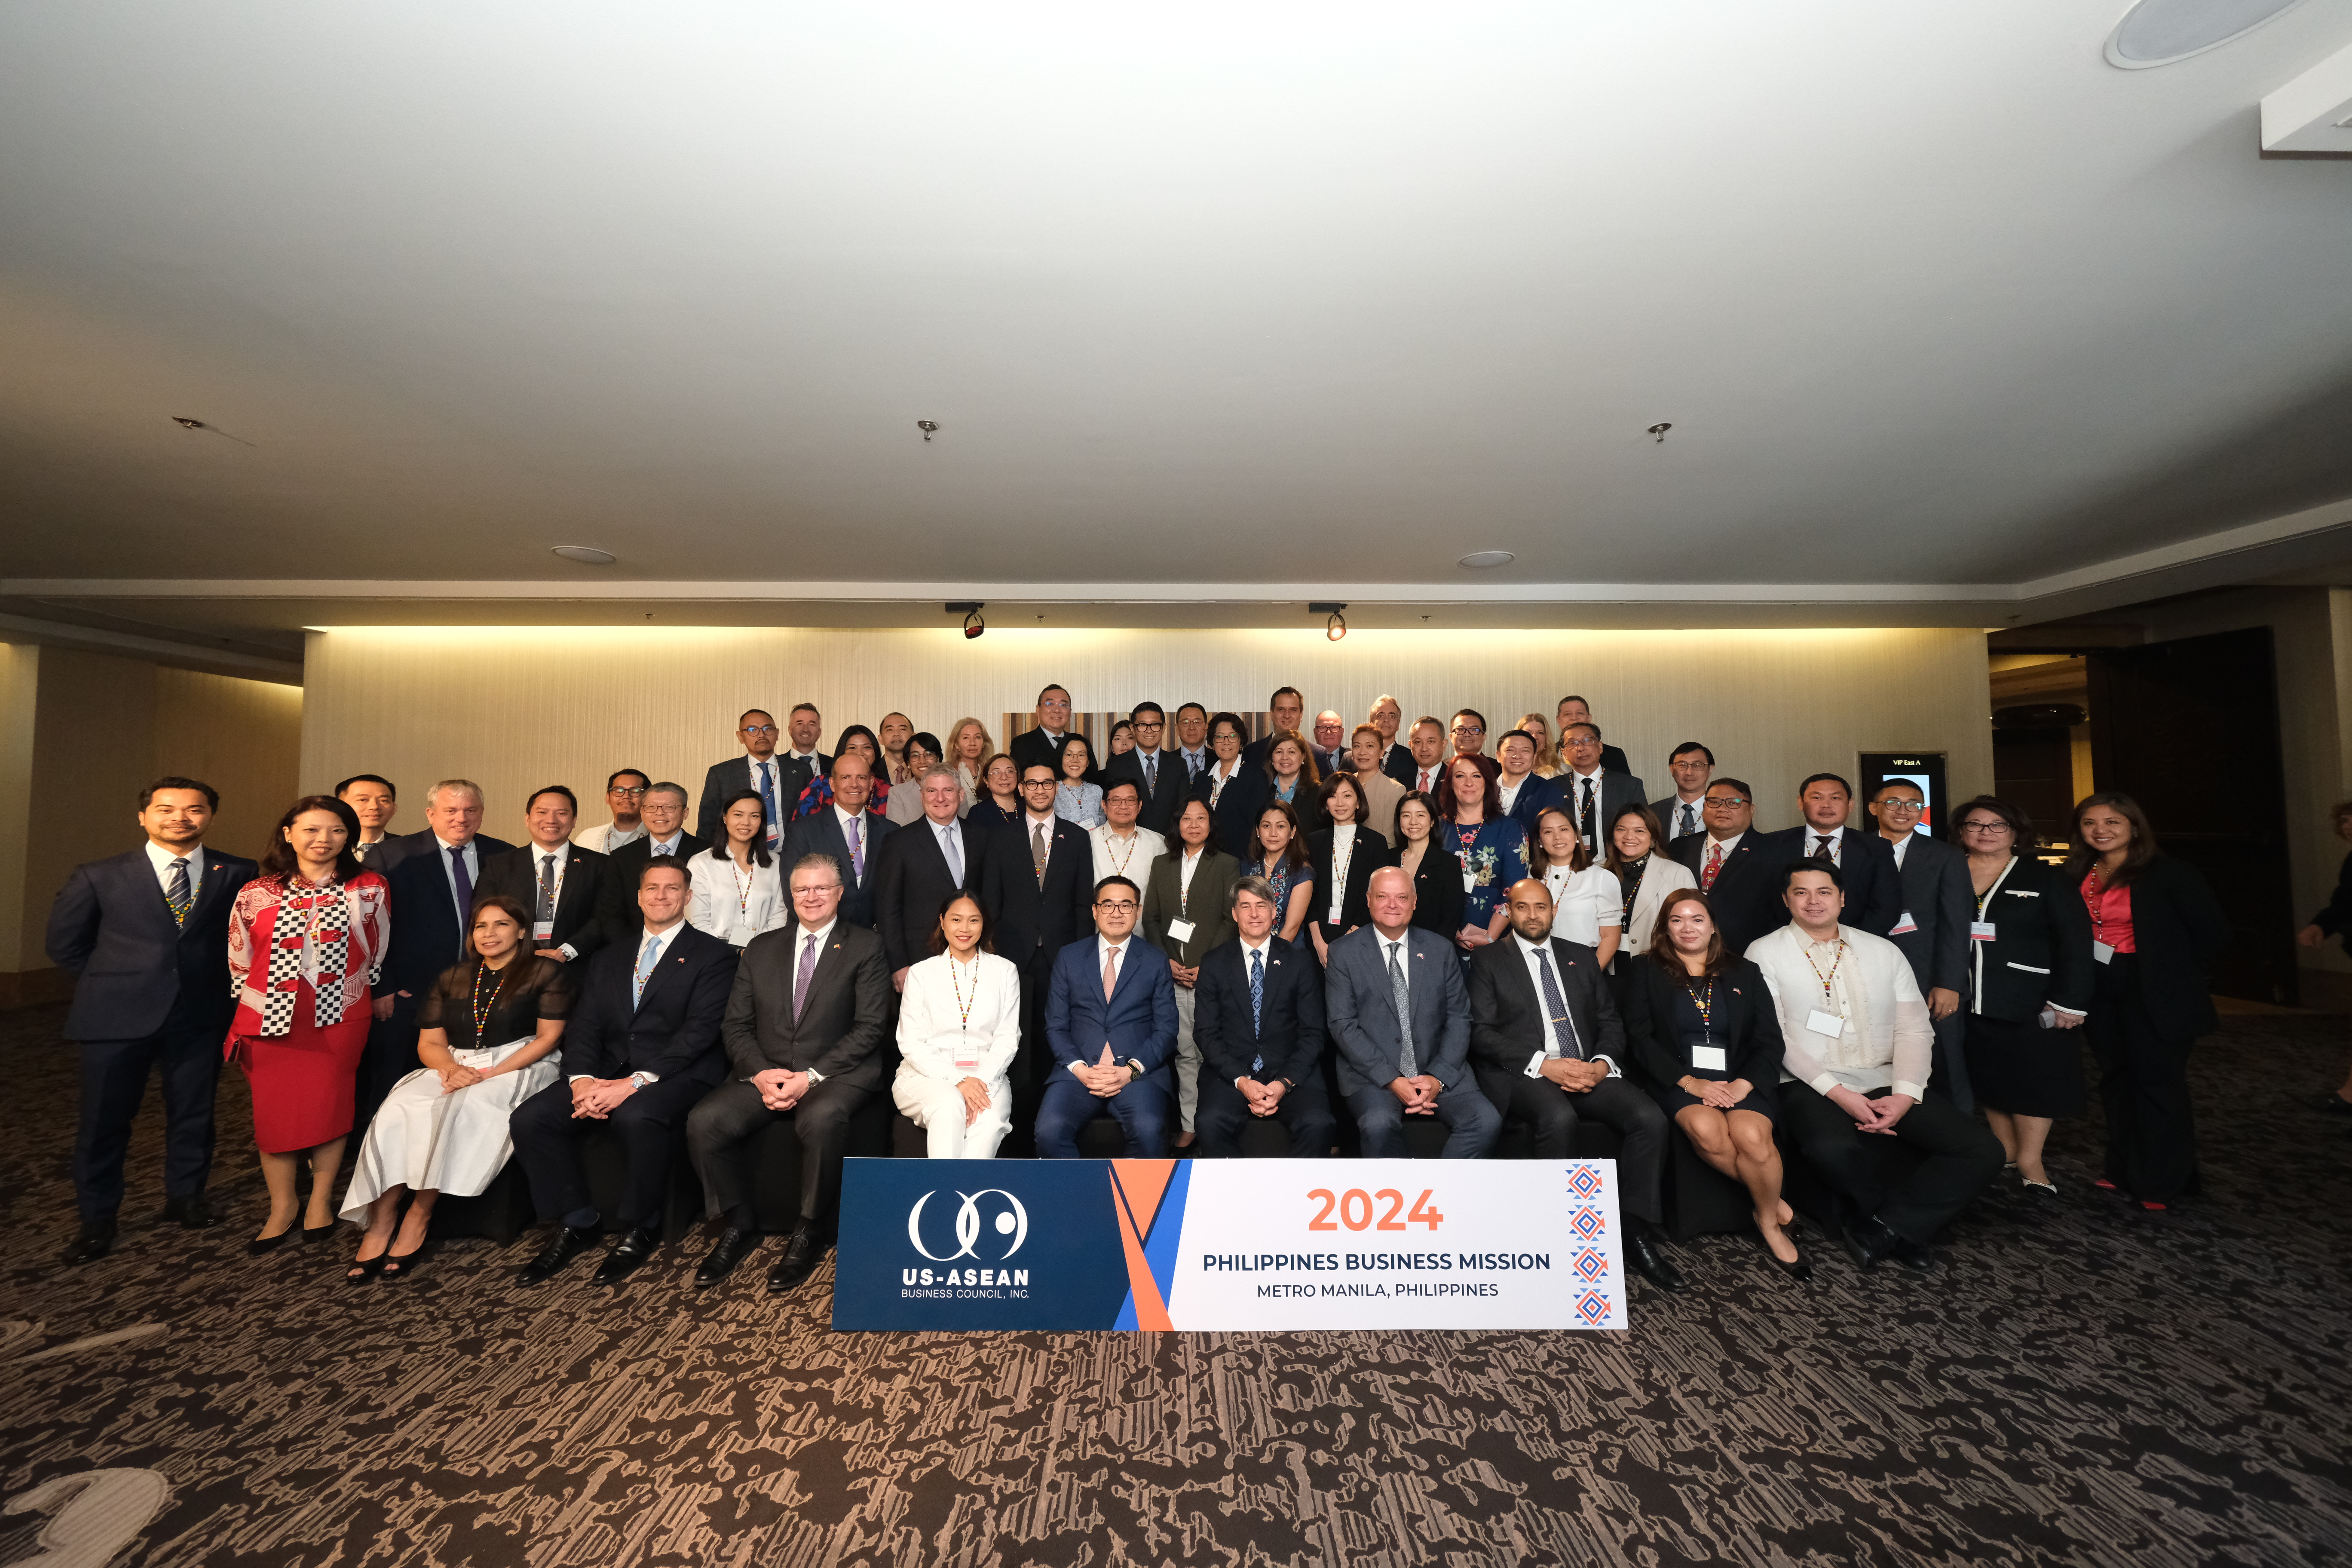 2024 Philippines Business Mission